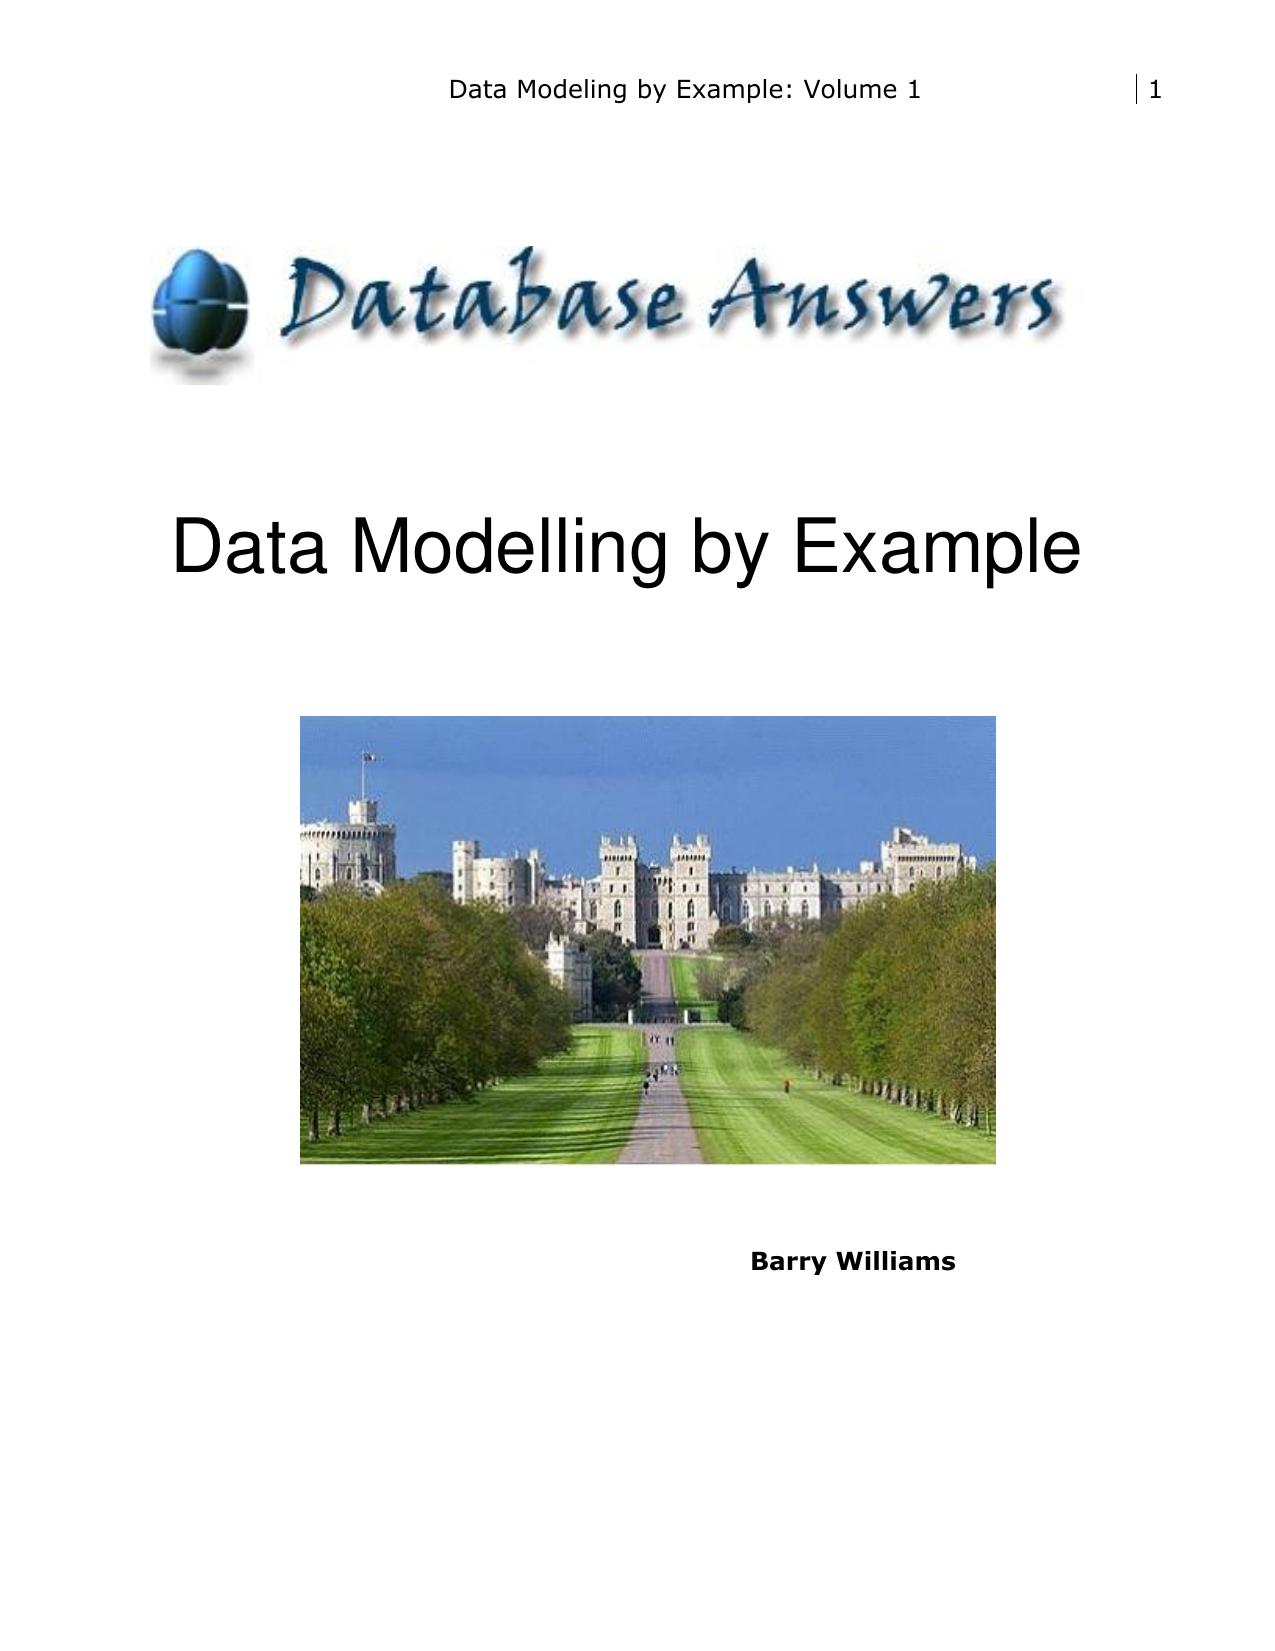 Learning Data Modelling by Example